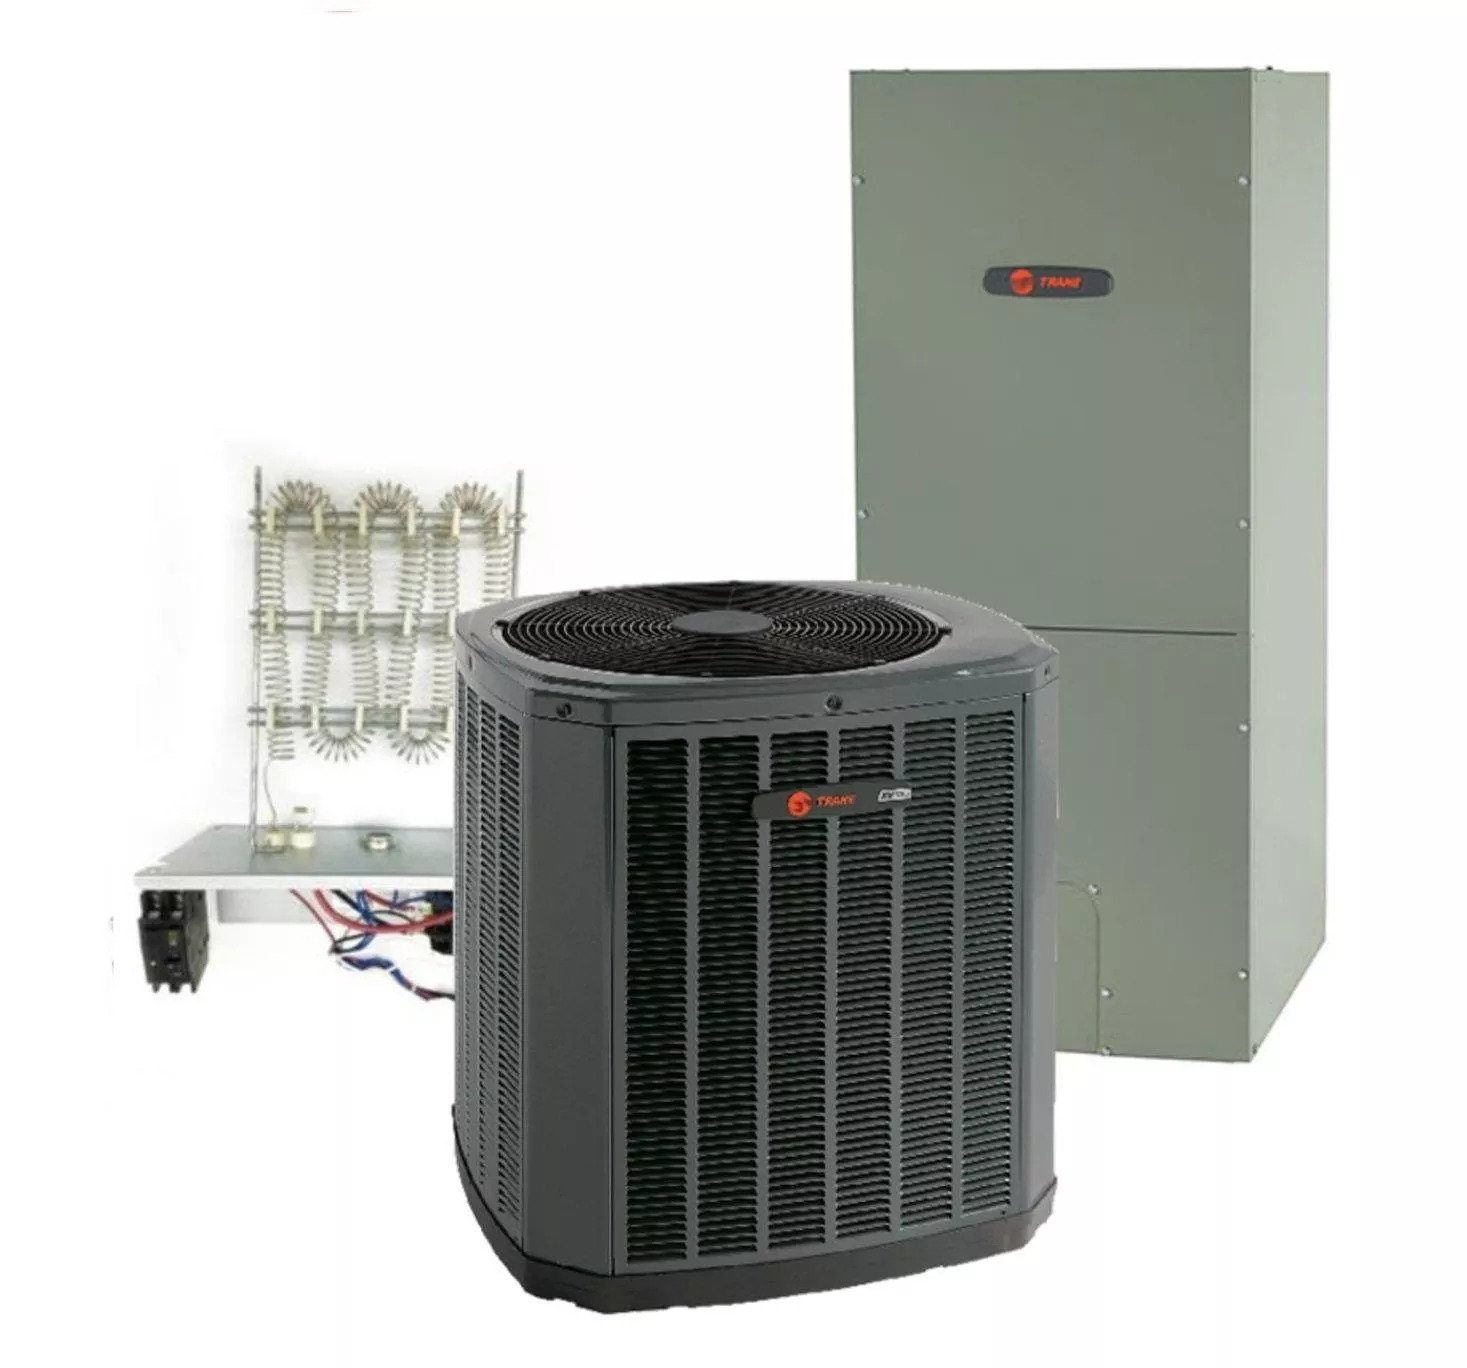  Trane 3 Ton 16 SEER2 Two-Stage Heat Pump System